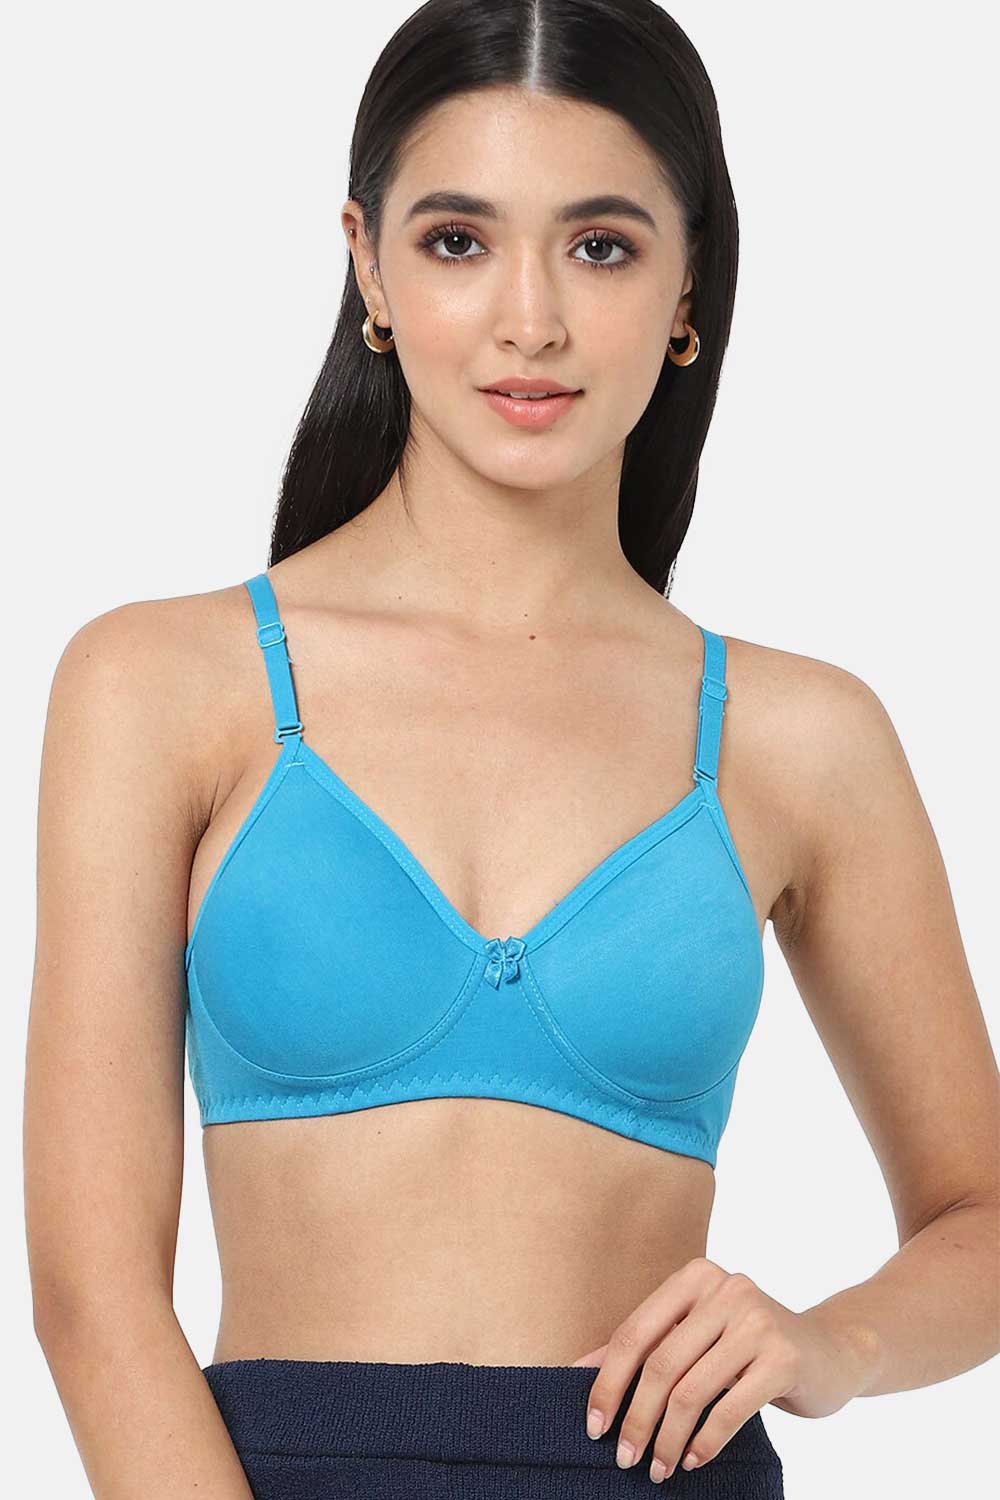 Buy Padded Non-Wired Full Cup Multiway Bridal Bra in Teal Blue